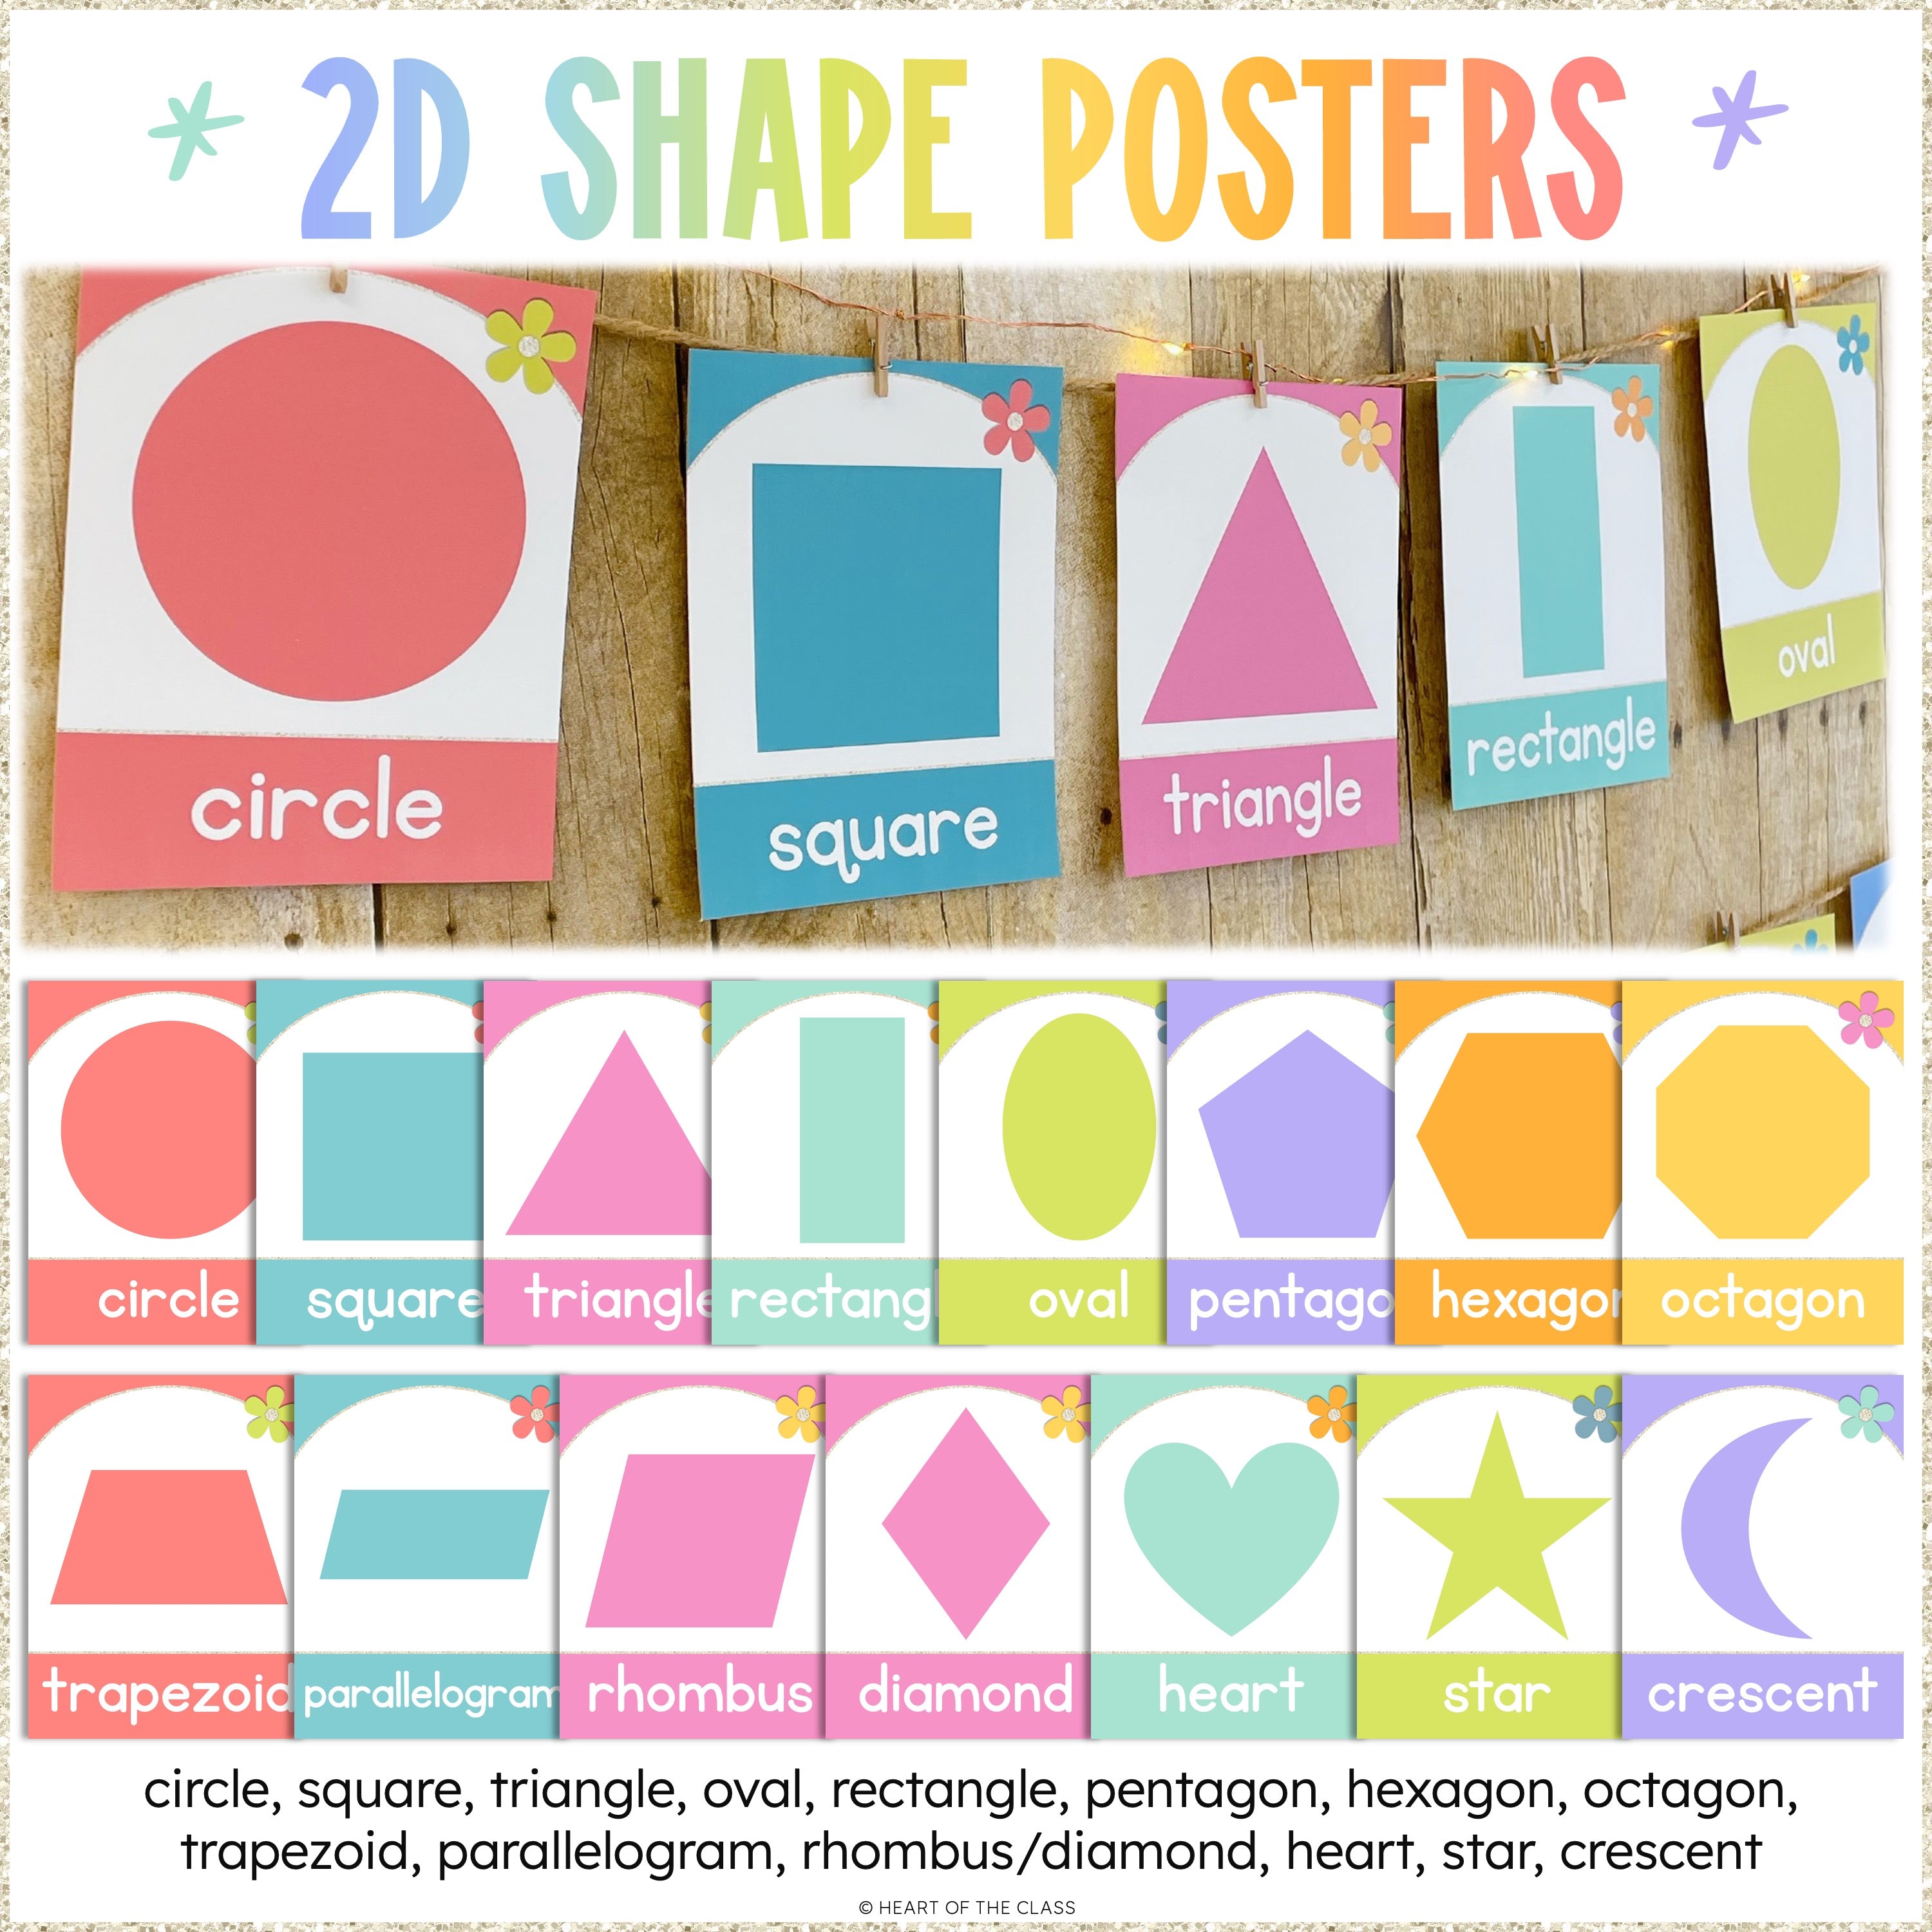 Hello Brights Shape Posters